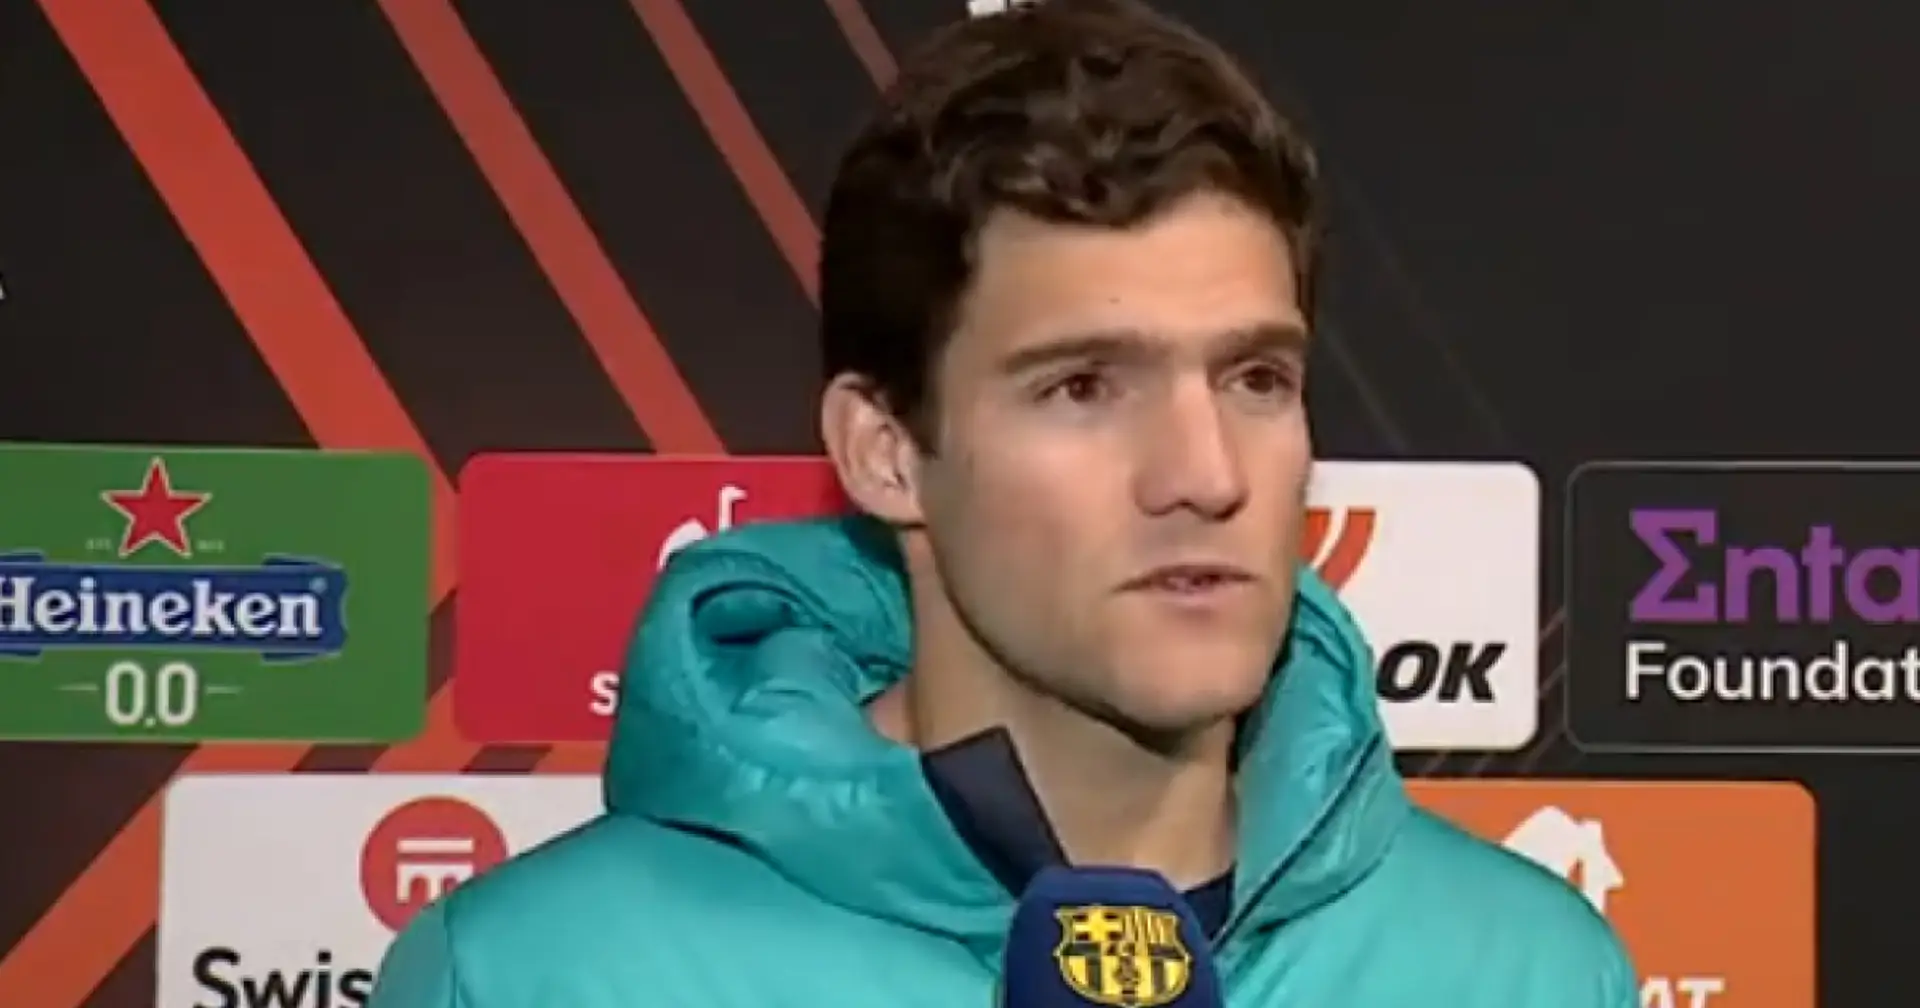 3 reasons why Marcos Alonso believes Barca wants him gone revealed 